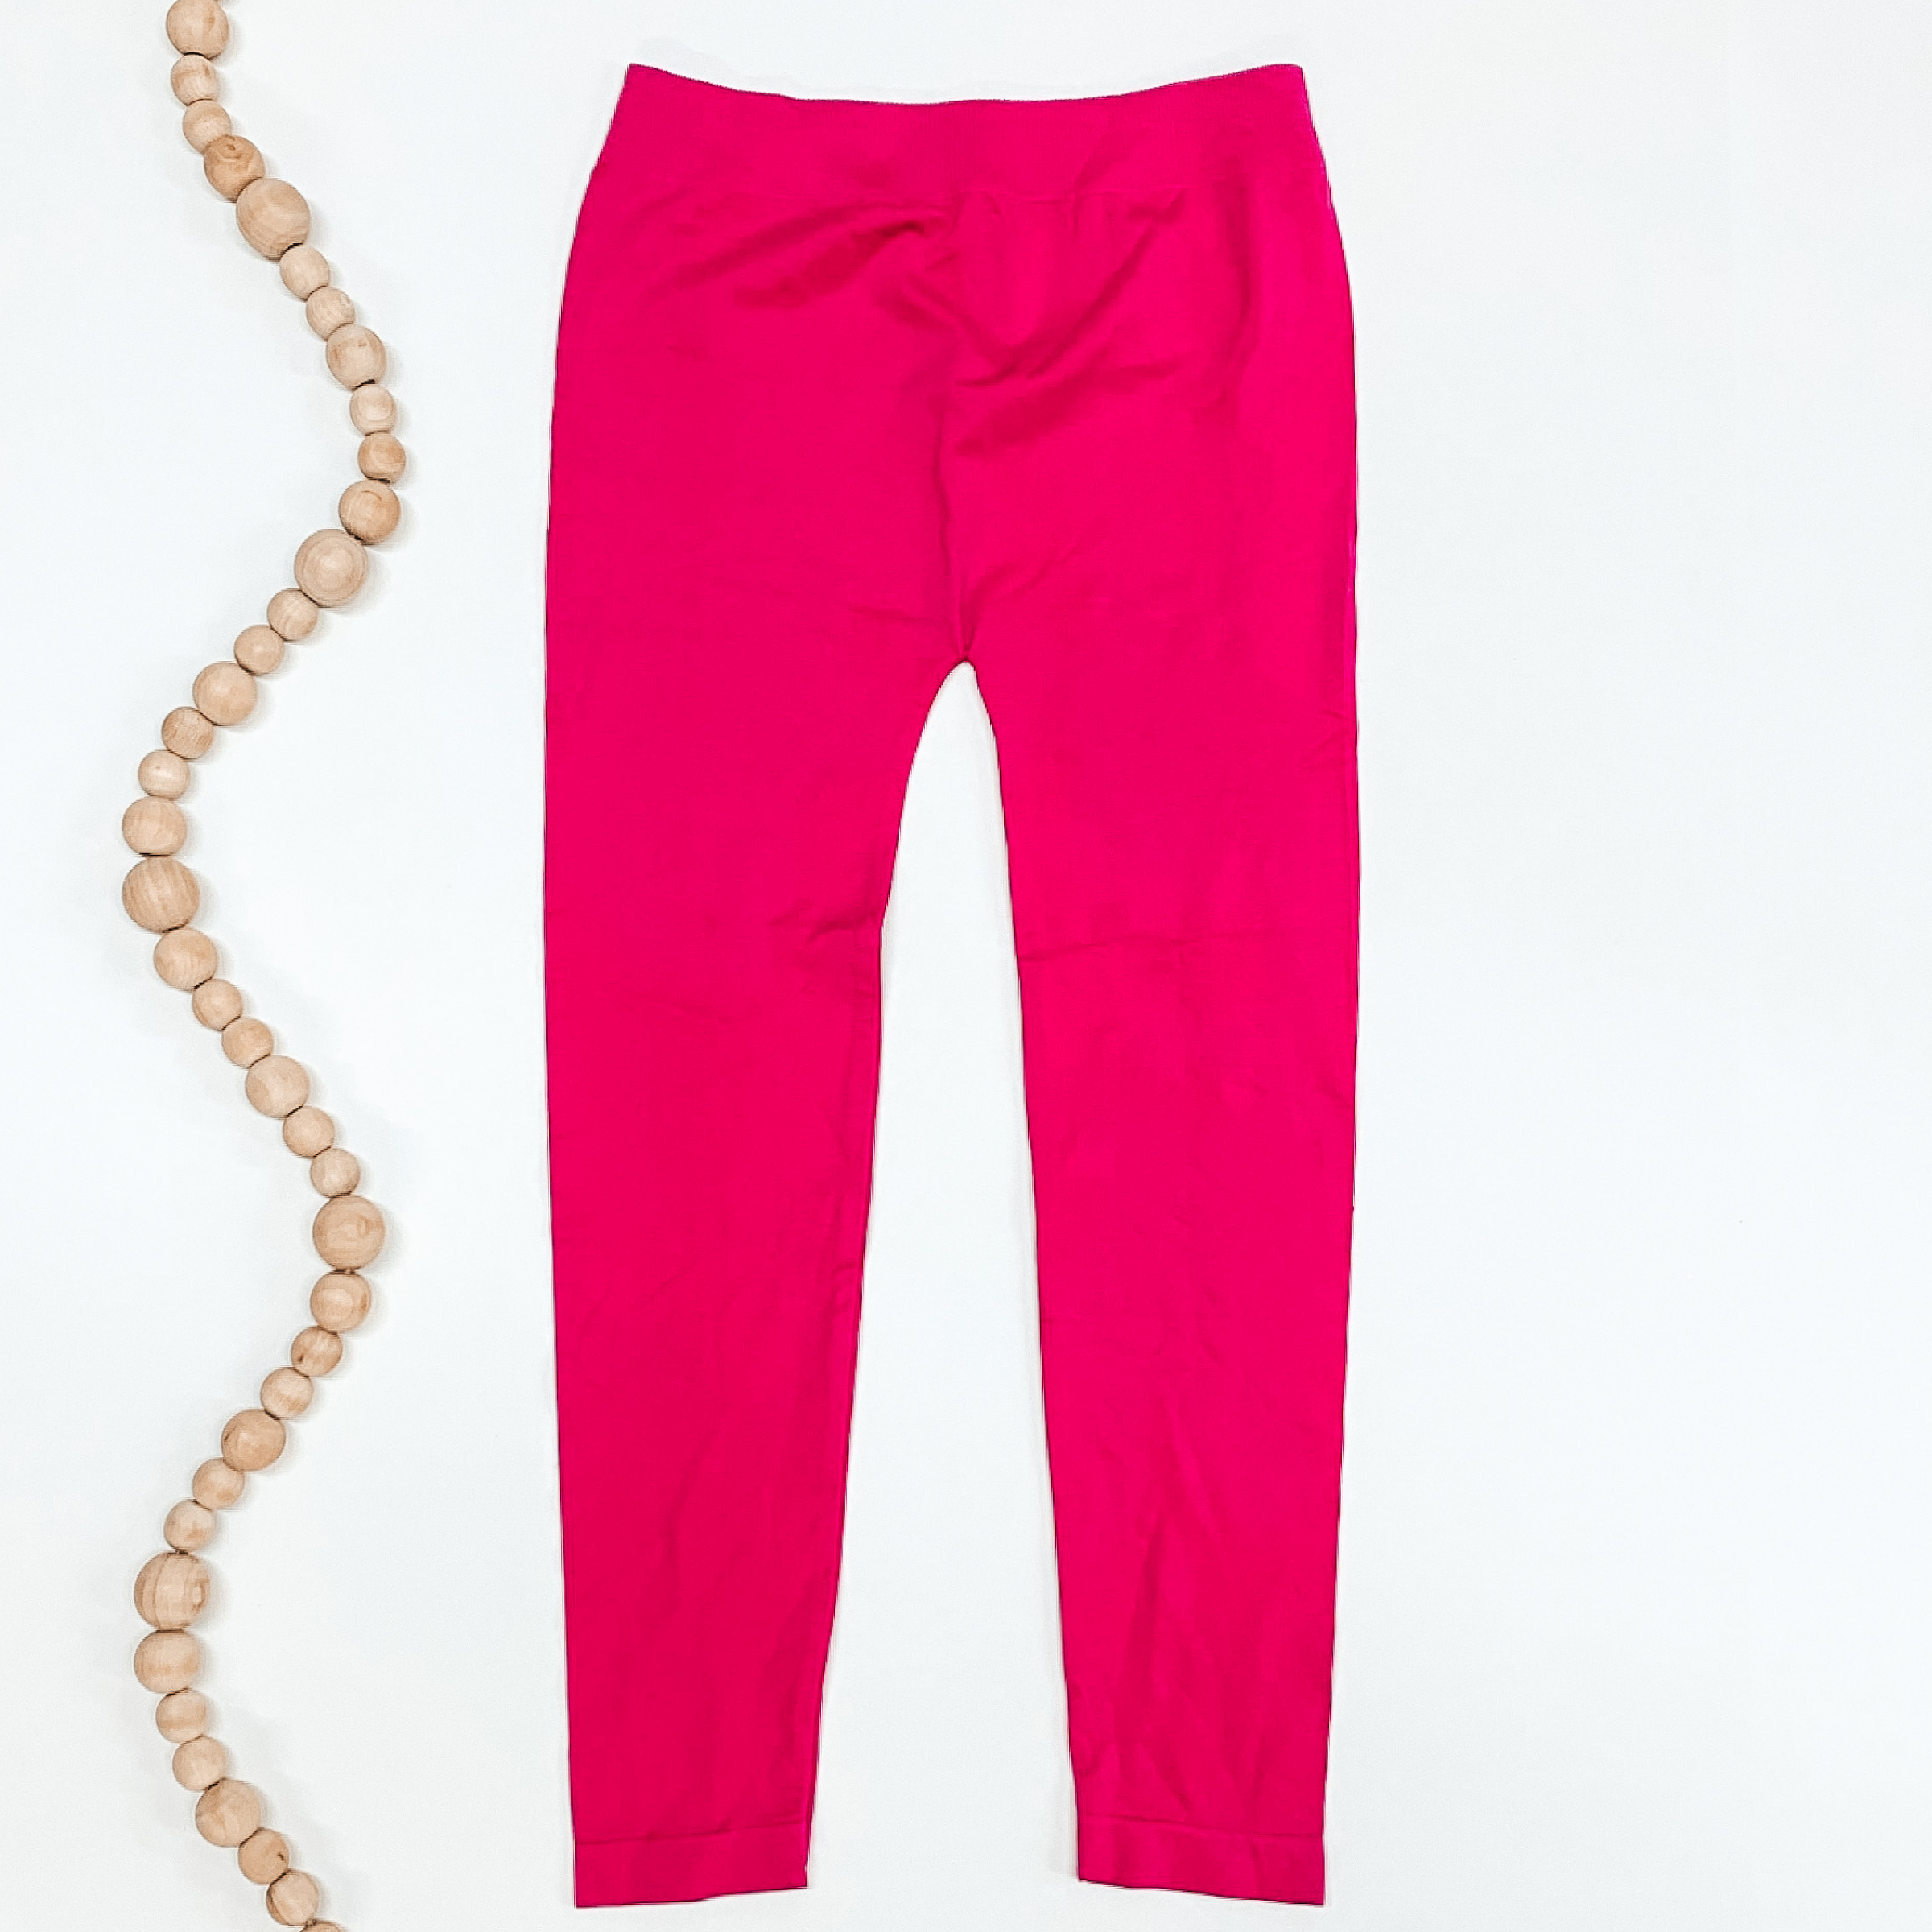 Hot pink colored leggings pictured on a white background with tan beads to the left of the leggings.